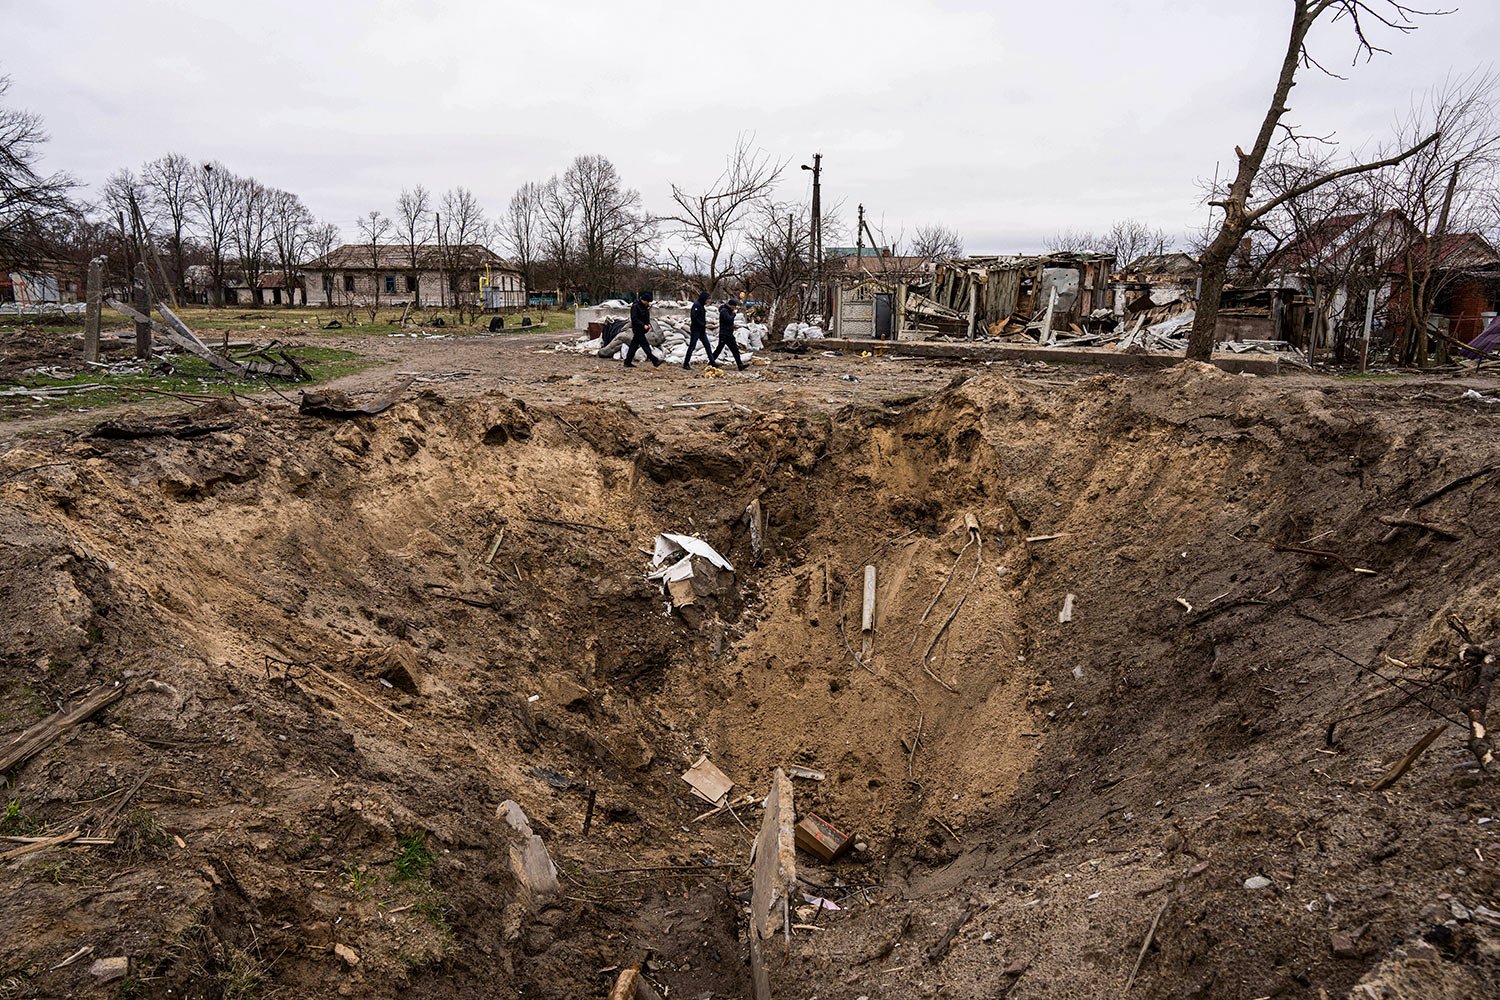  People walk past a crater from an explosion in Chernihiv, Ukraine, Wednesday, April 13, 2022. (AP Photo/Evgeniy Maloletka) 